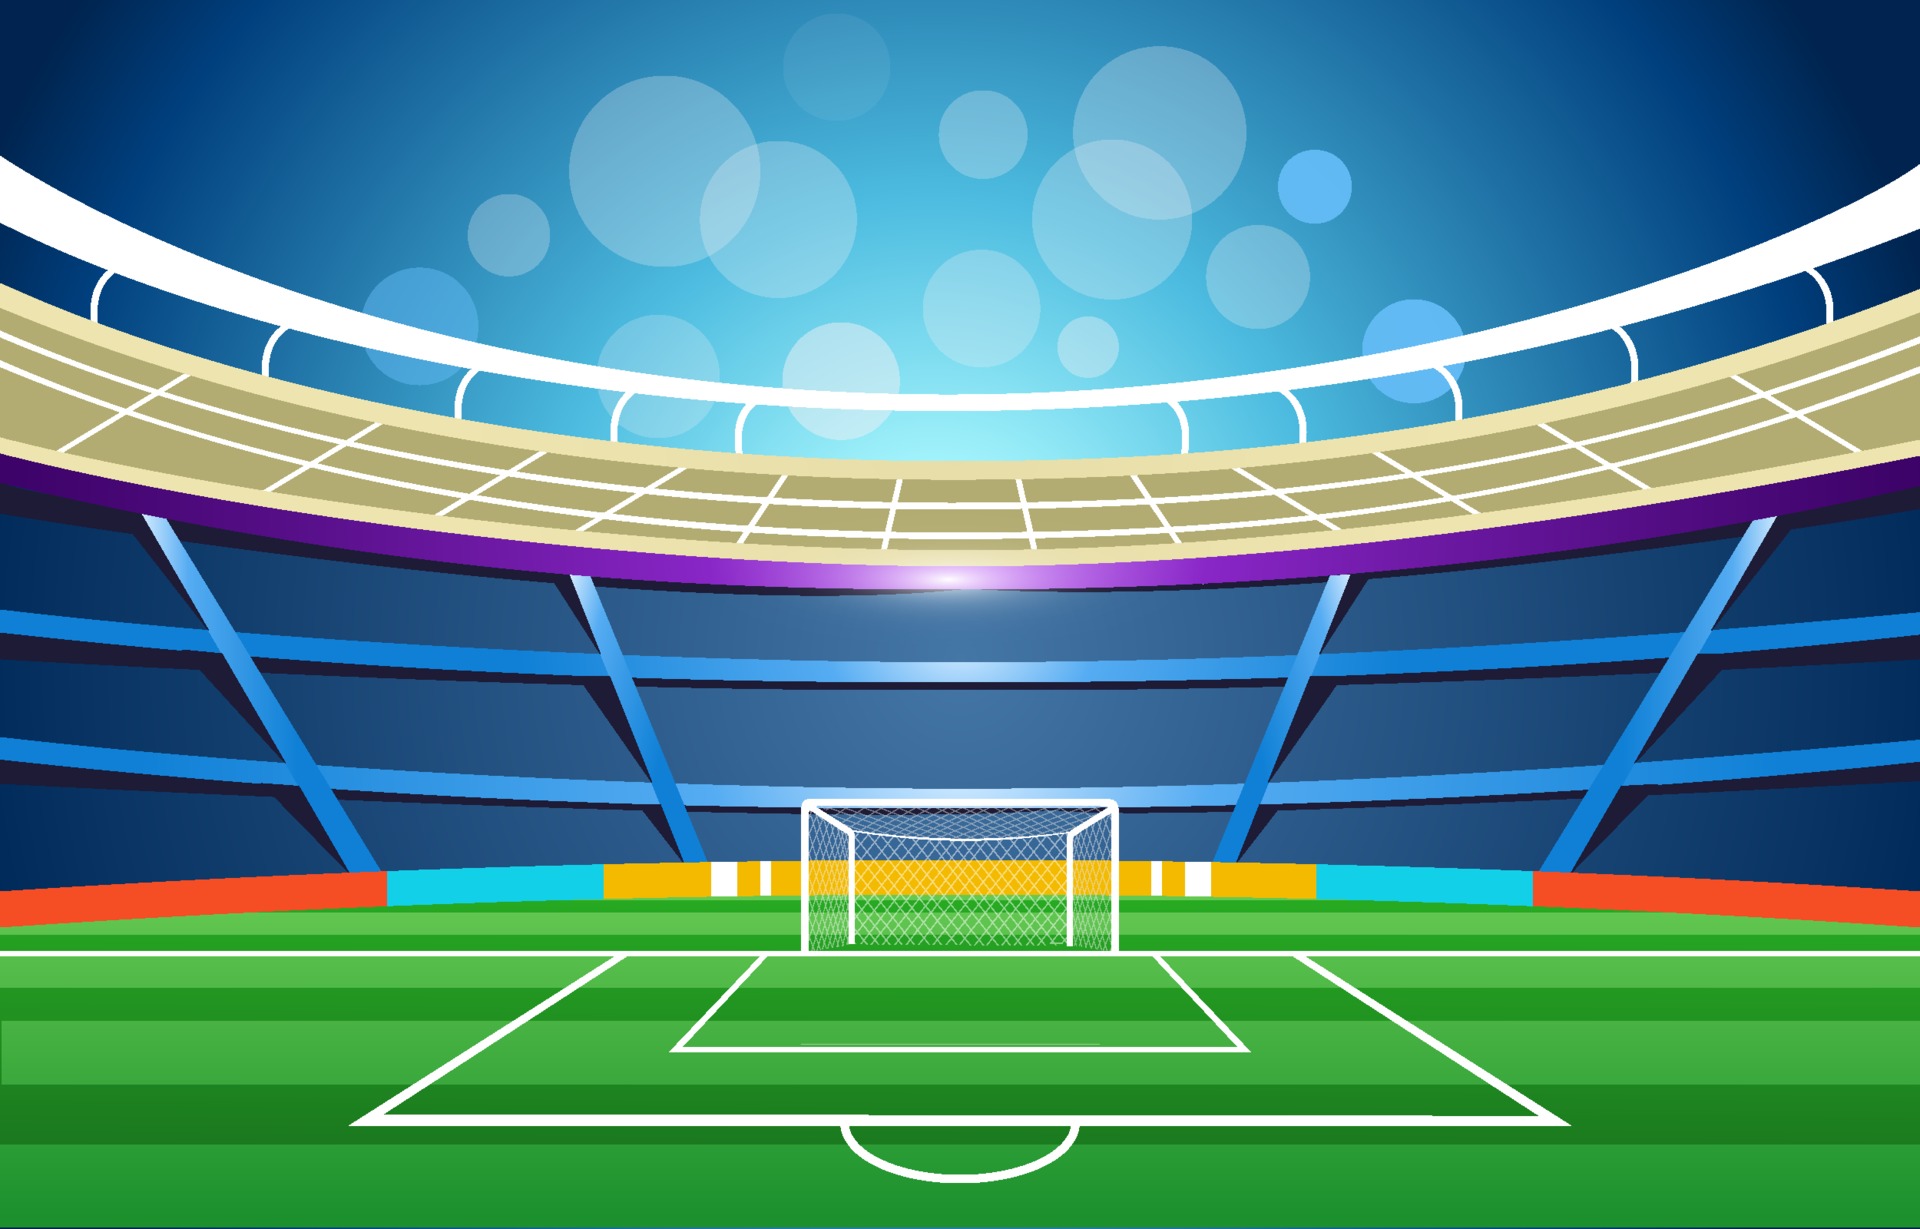 Football Background Images 1100 Free Banner Background Photos Download   Lovepik